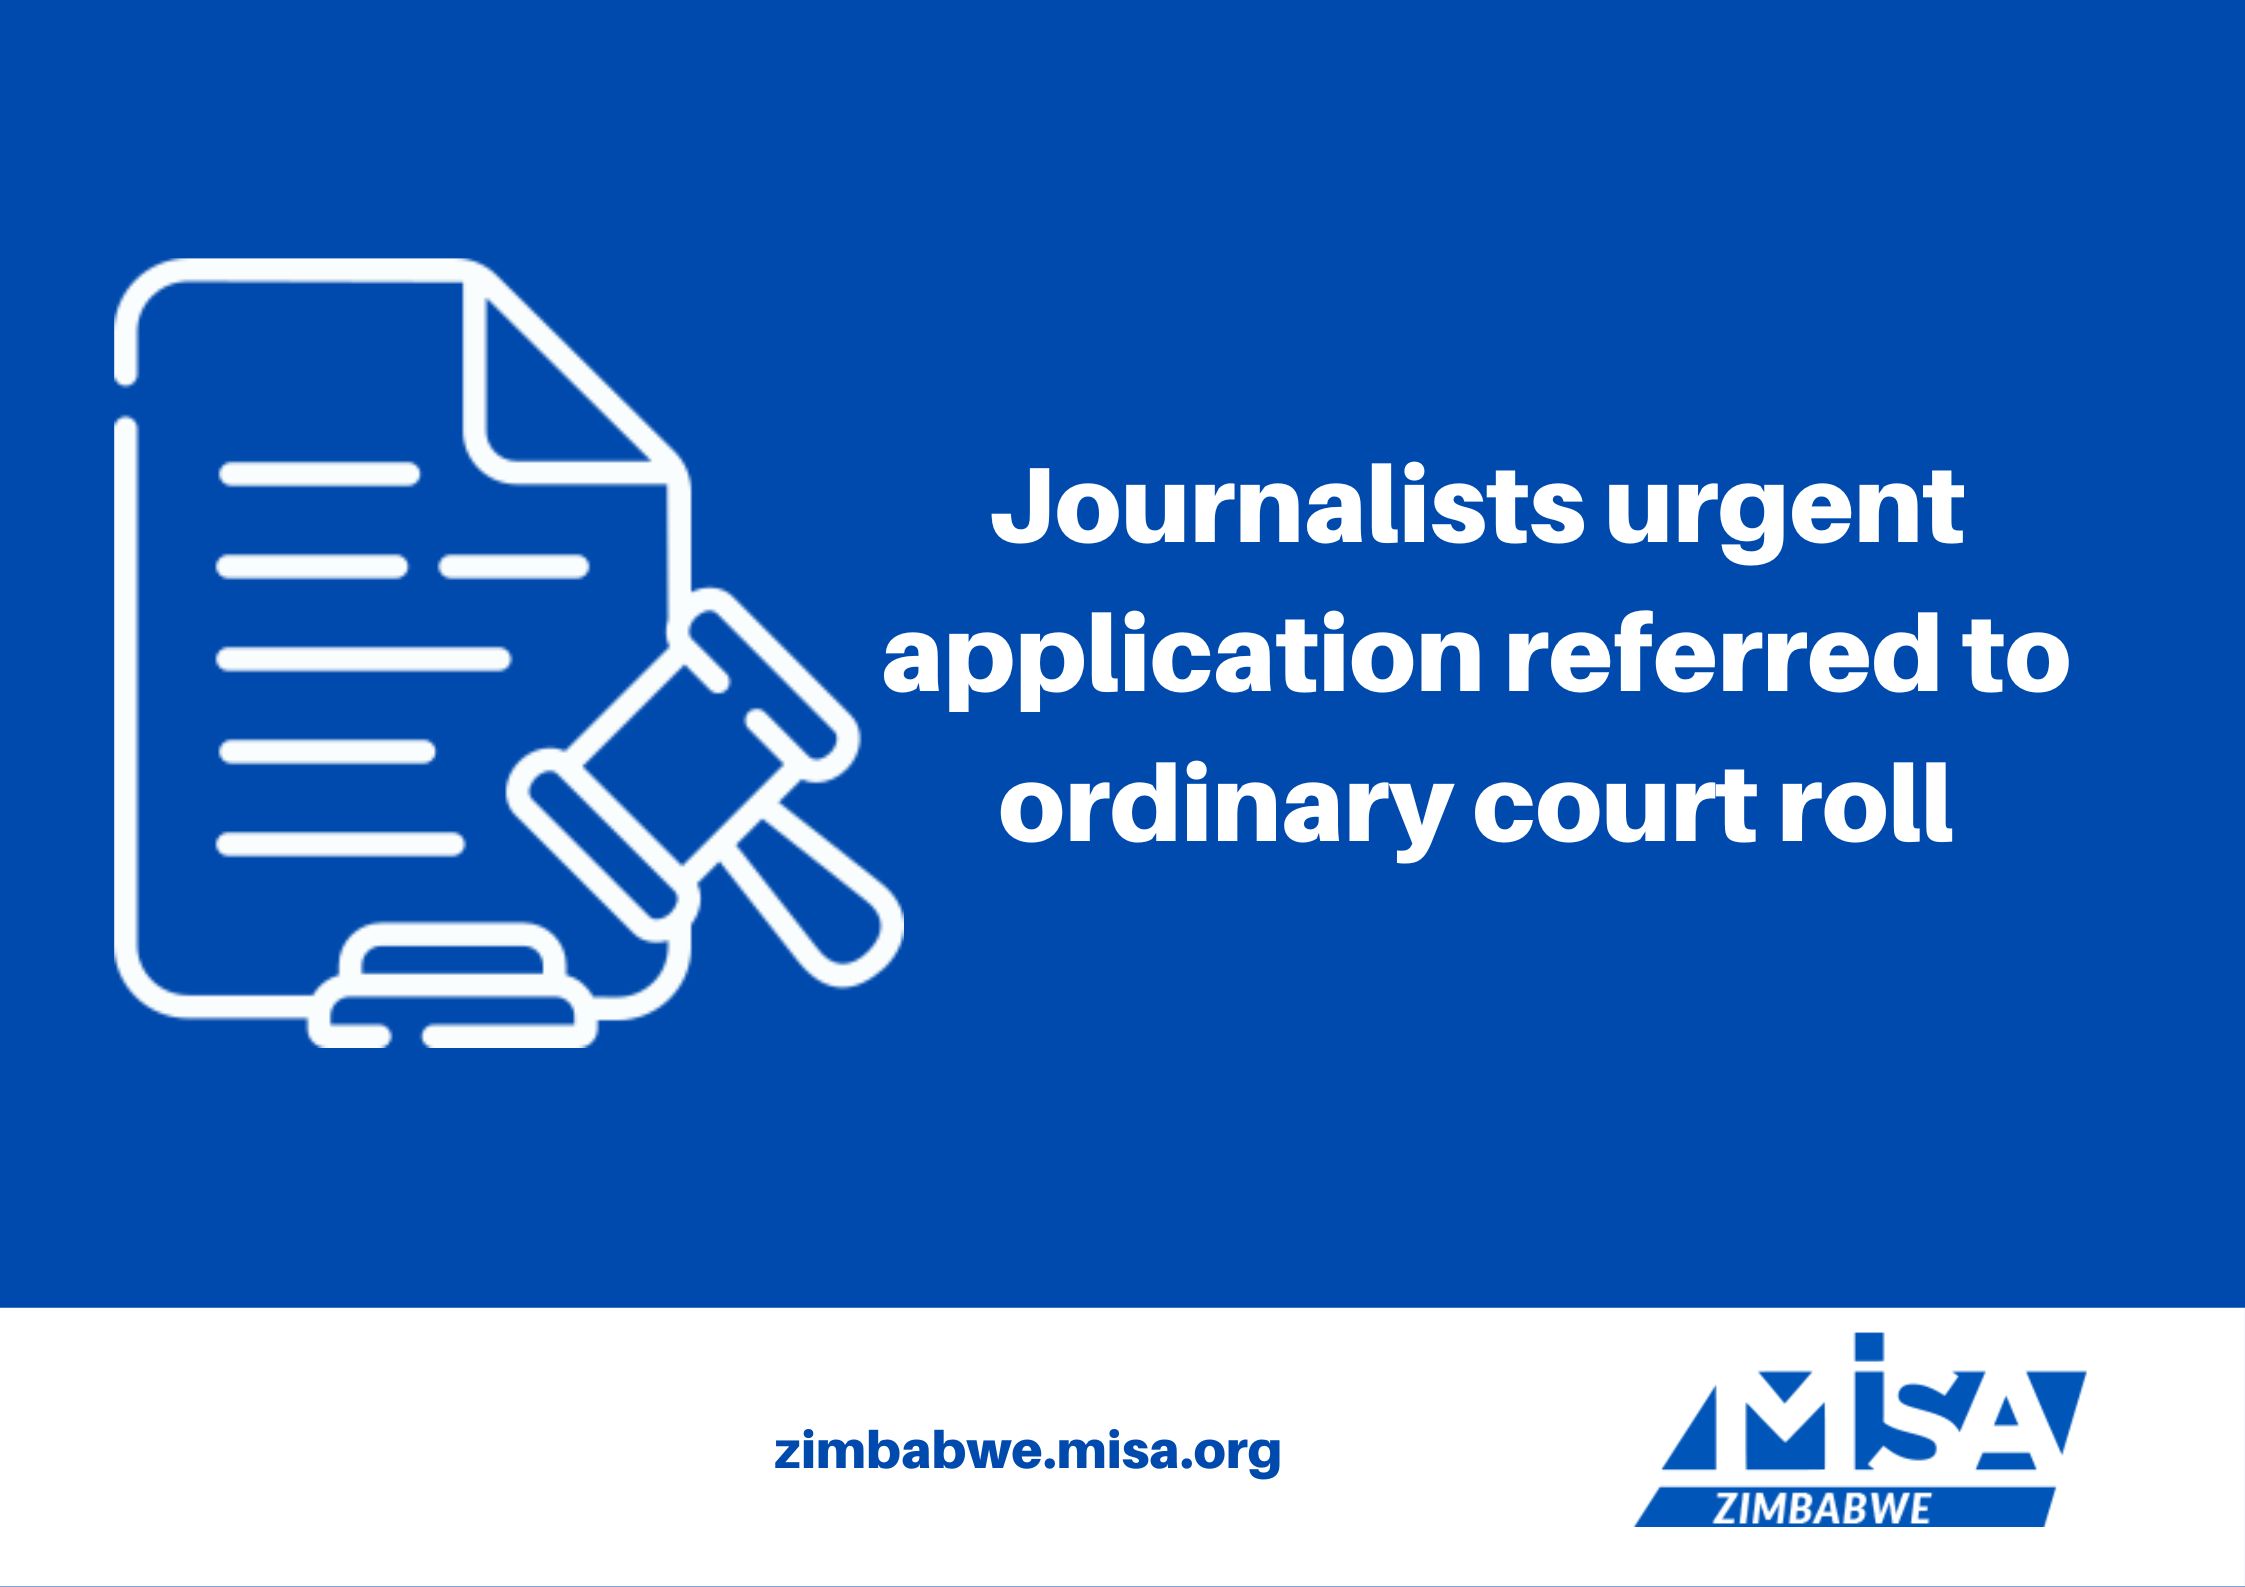 Journalists urgent application referred to ordinary court roll